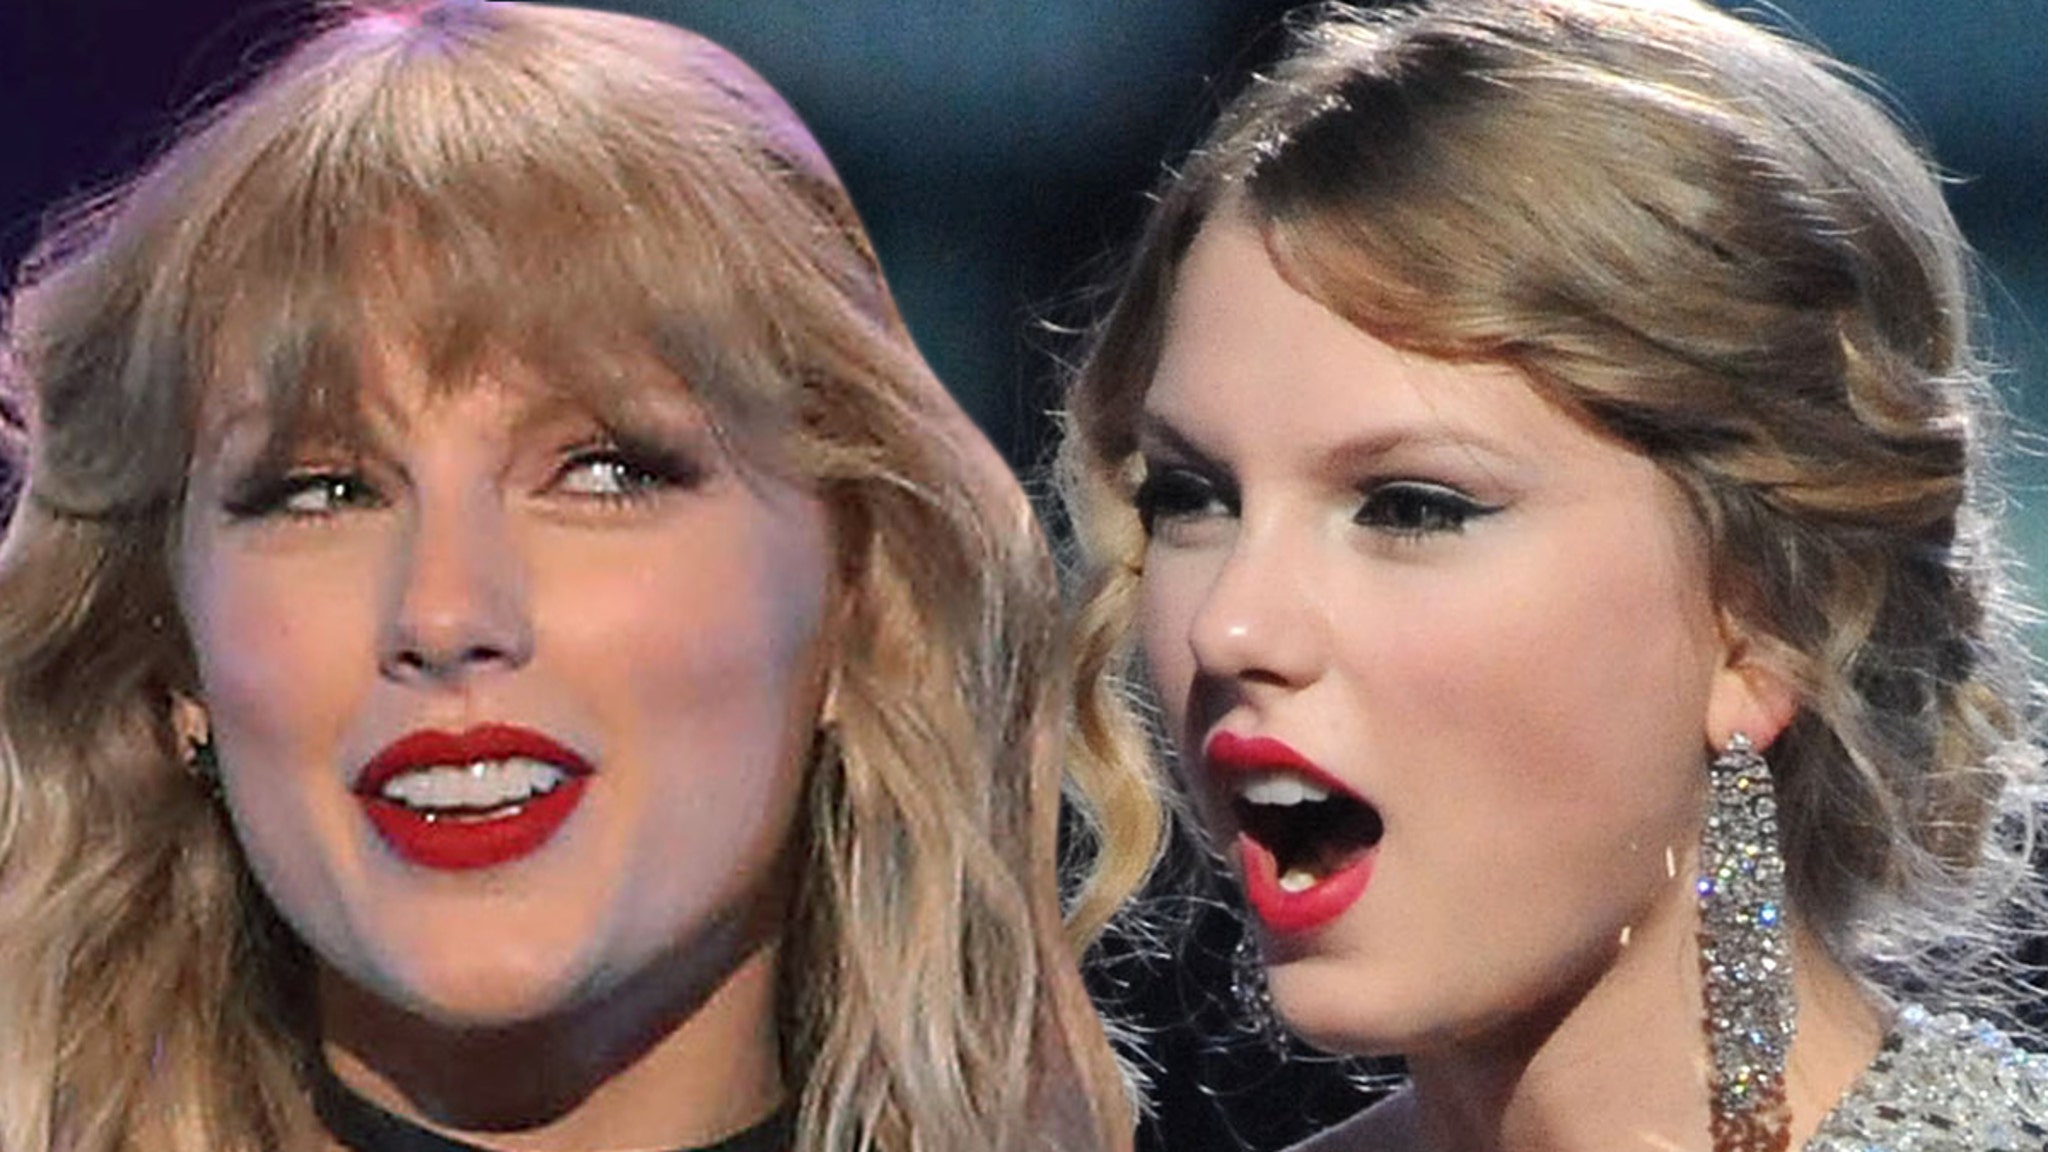 Taylor Swift’s re-recording of ‘Love Story’ got off to a great start